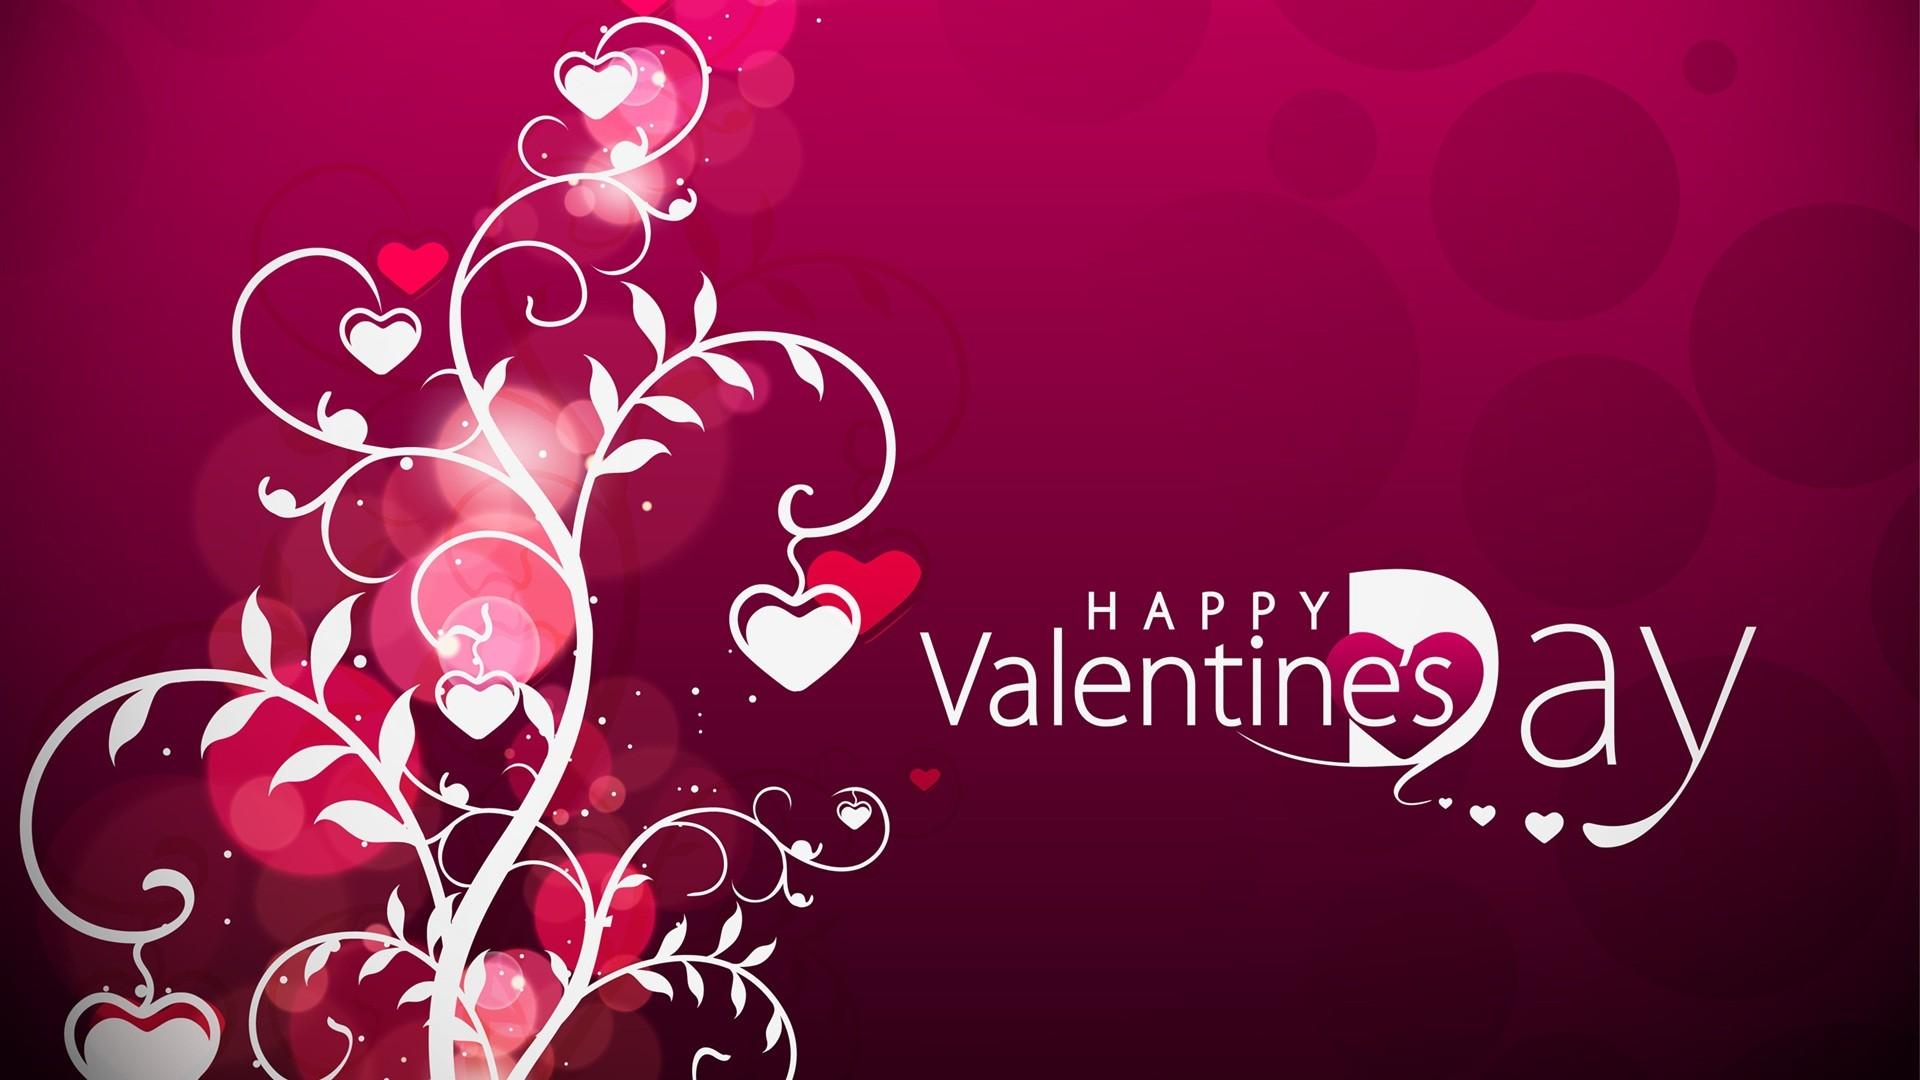 Free download Valentines Day HD Wallpaper Background